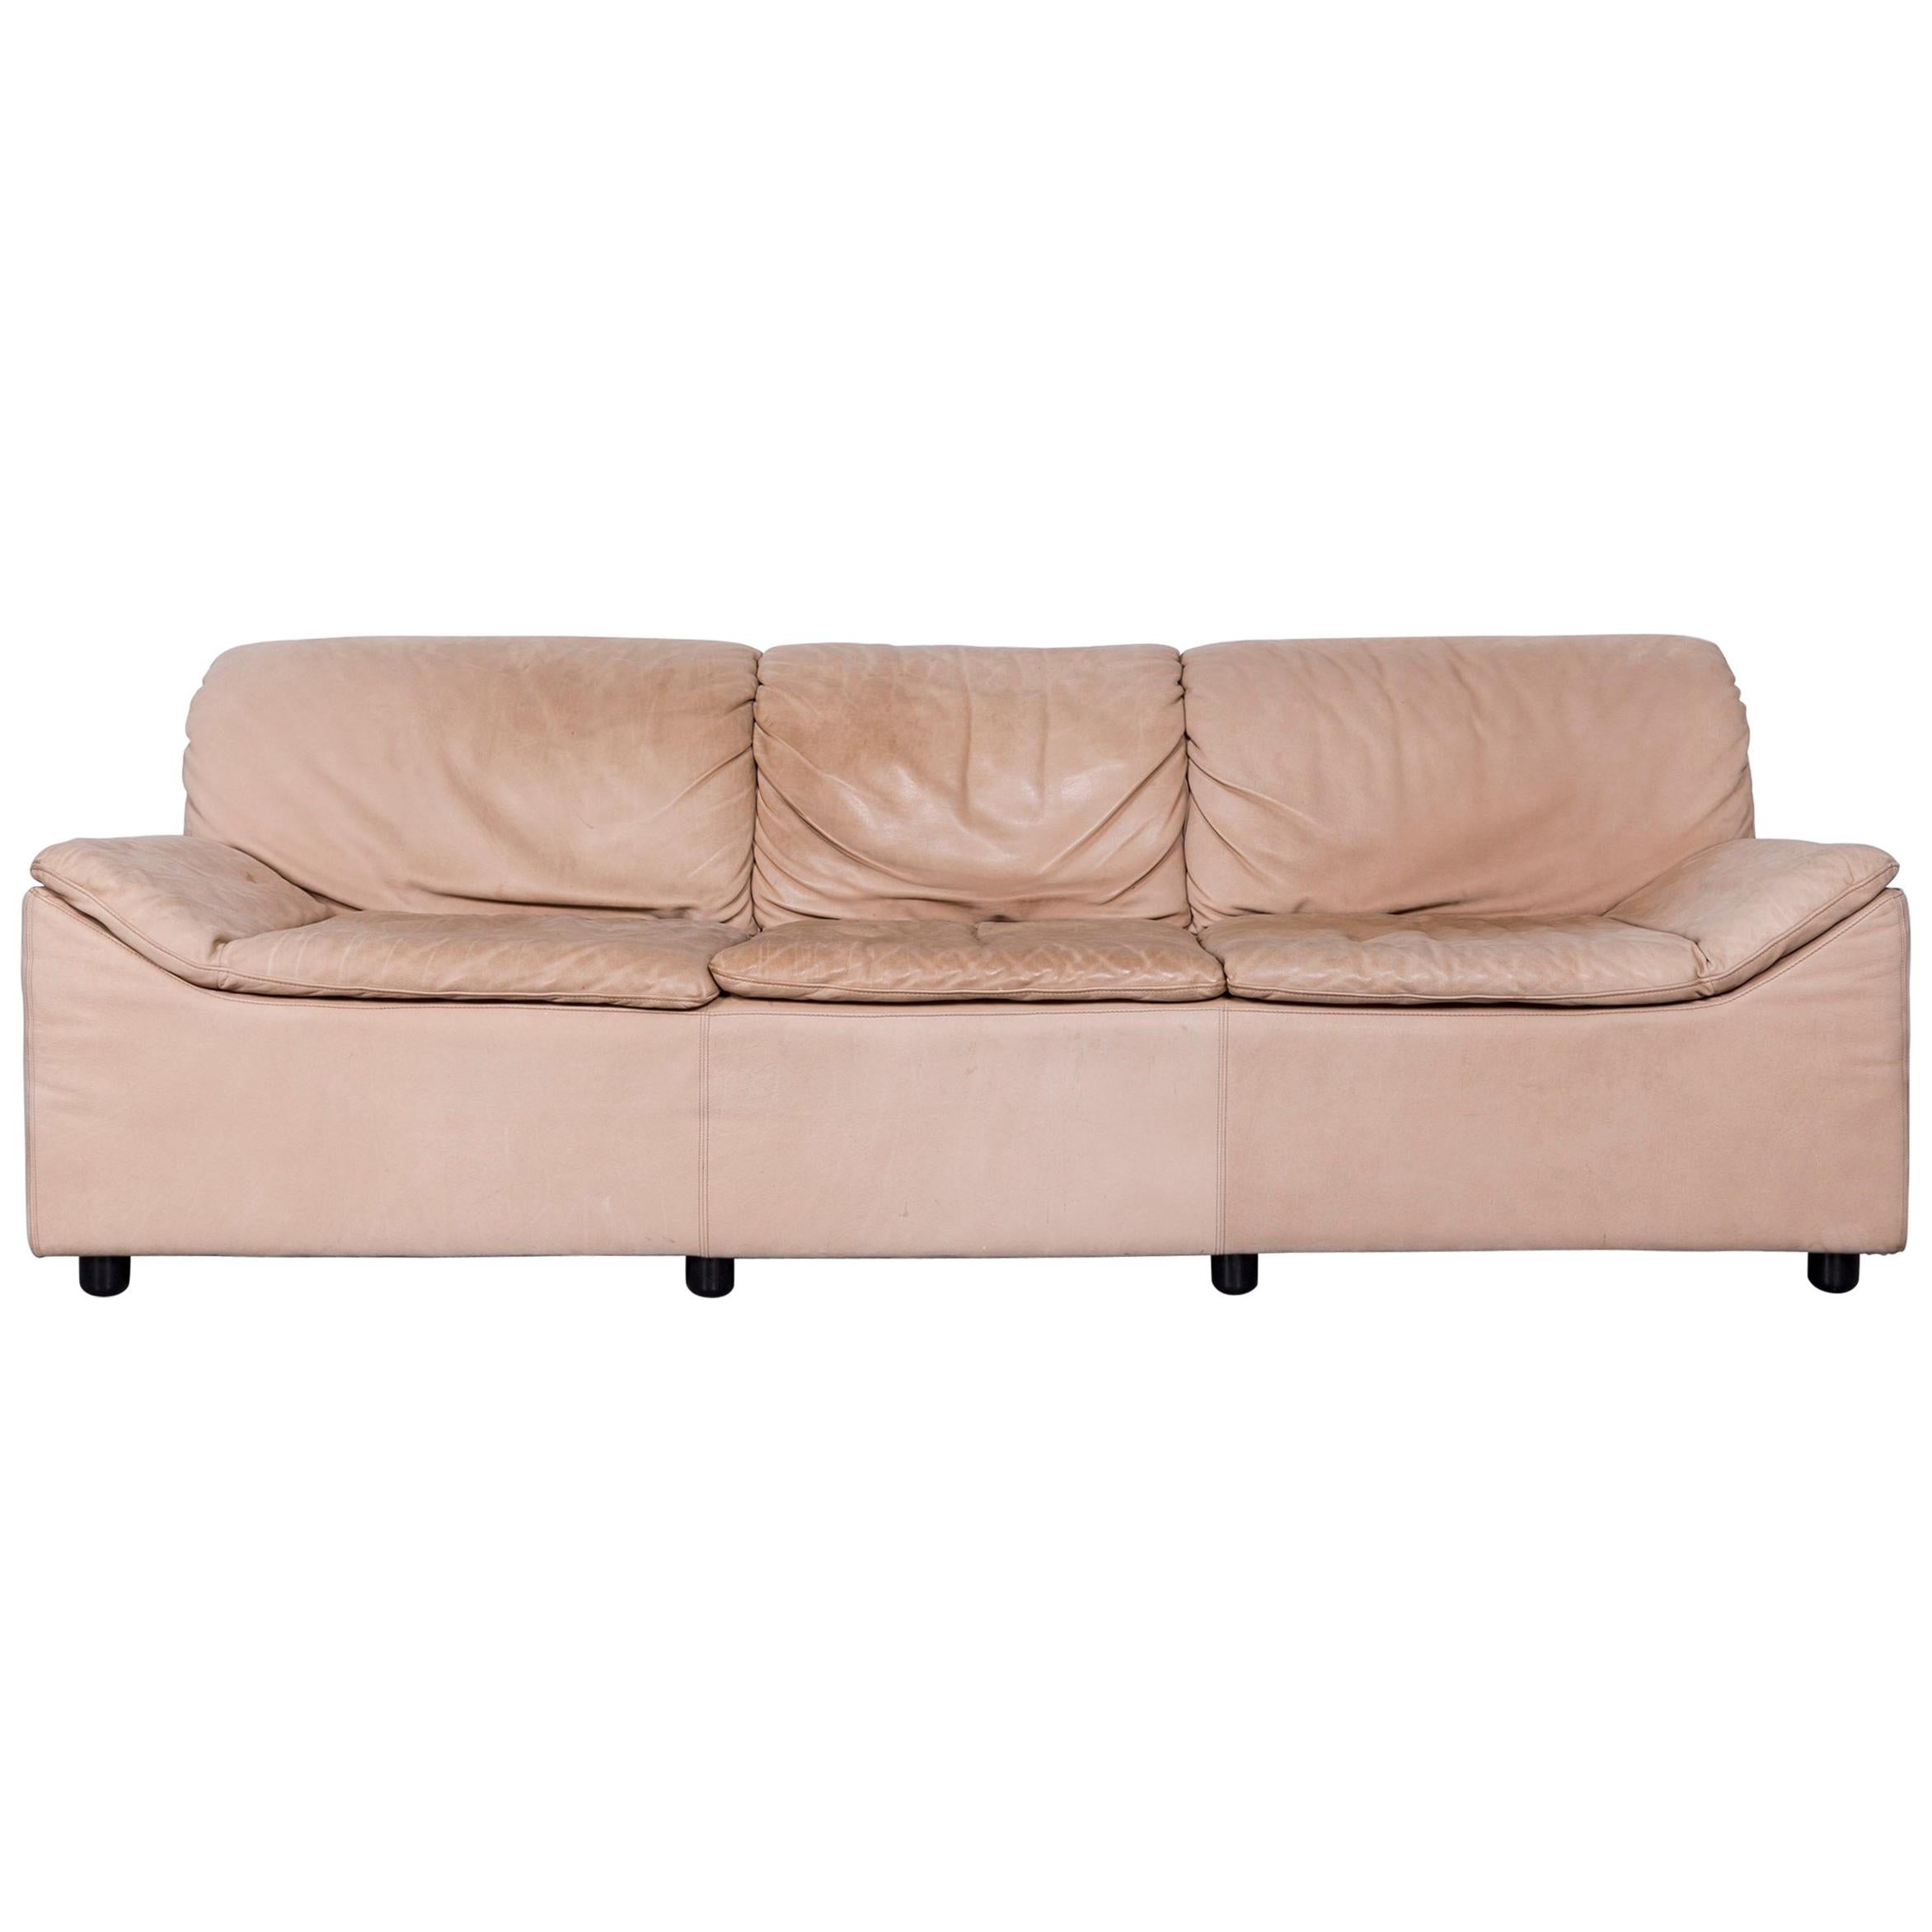 Kill International Golf Designer Sofa Leather Beige Three-Seat Couch from 1984 For Sale